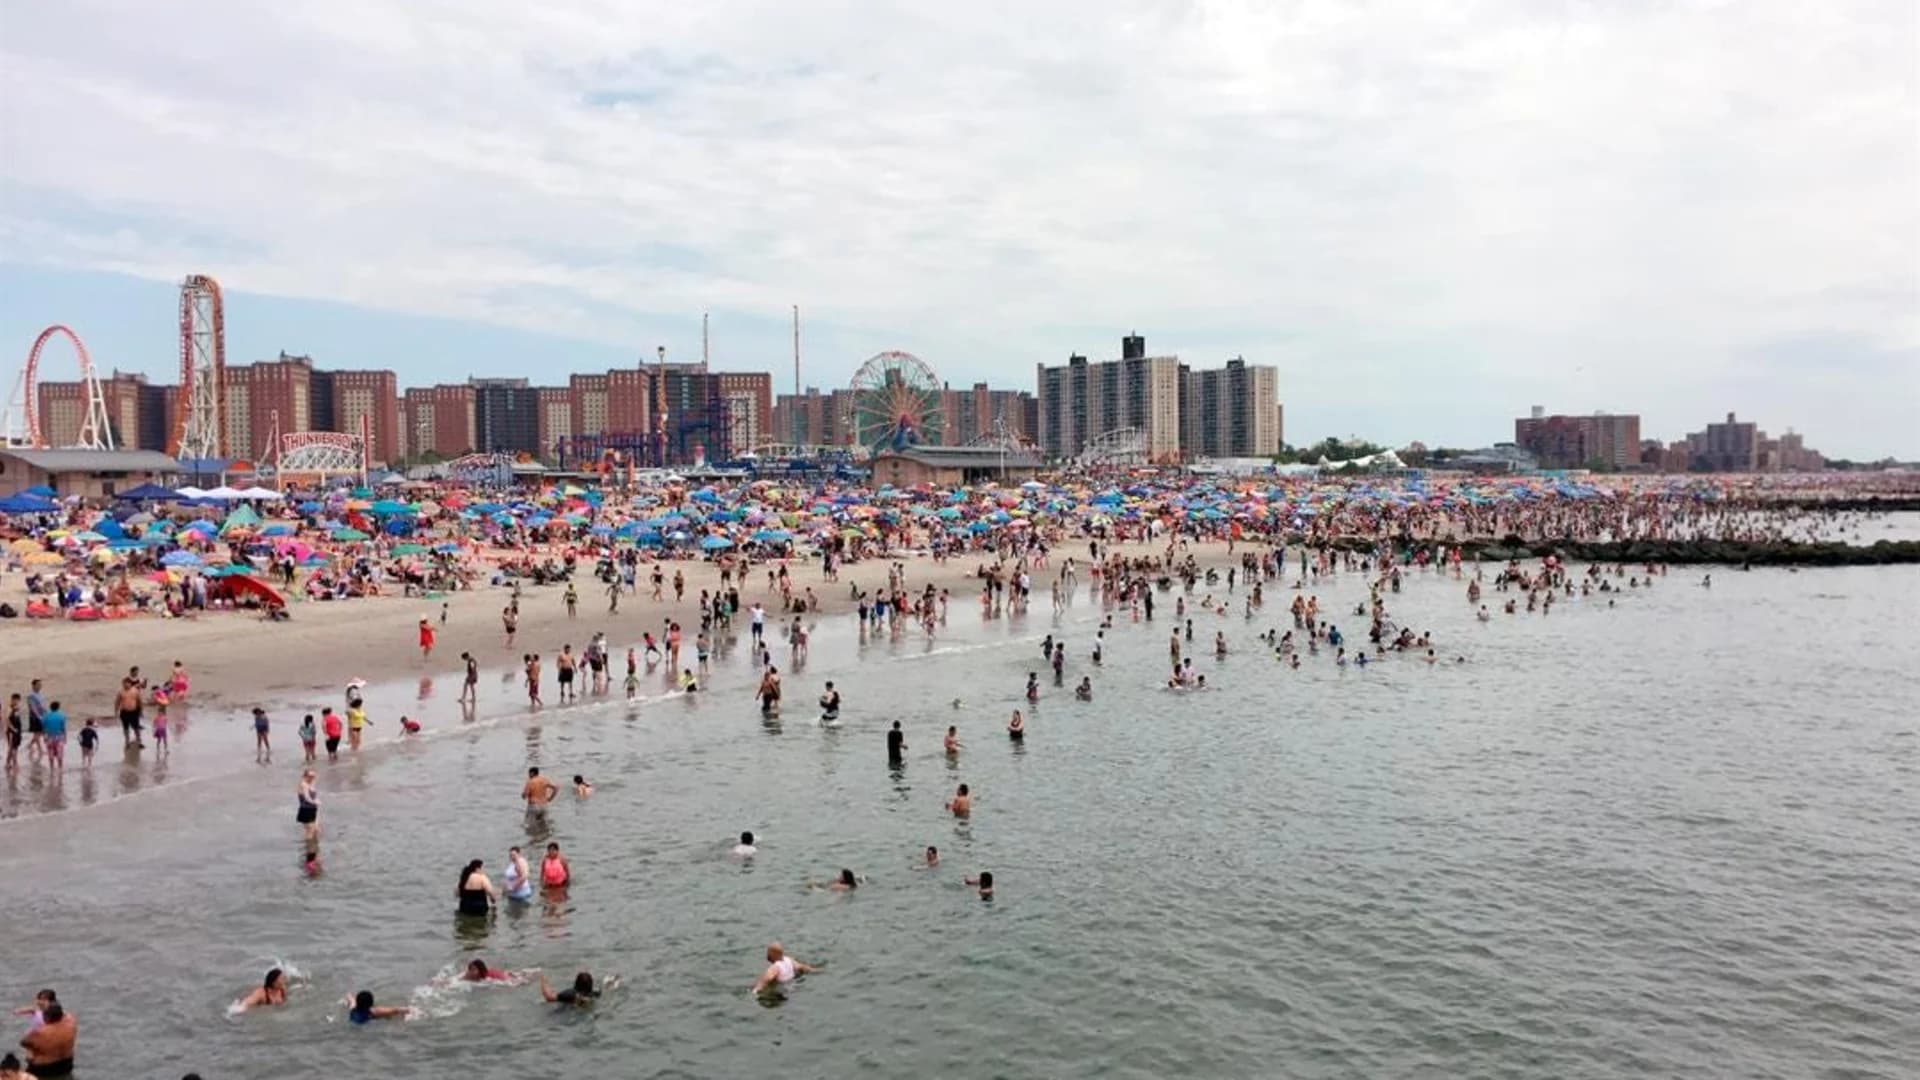 'We're not ready yet': Mayor says NYC beaches will remain closed for Memorial Day weekend